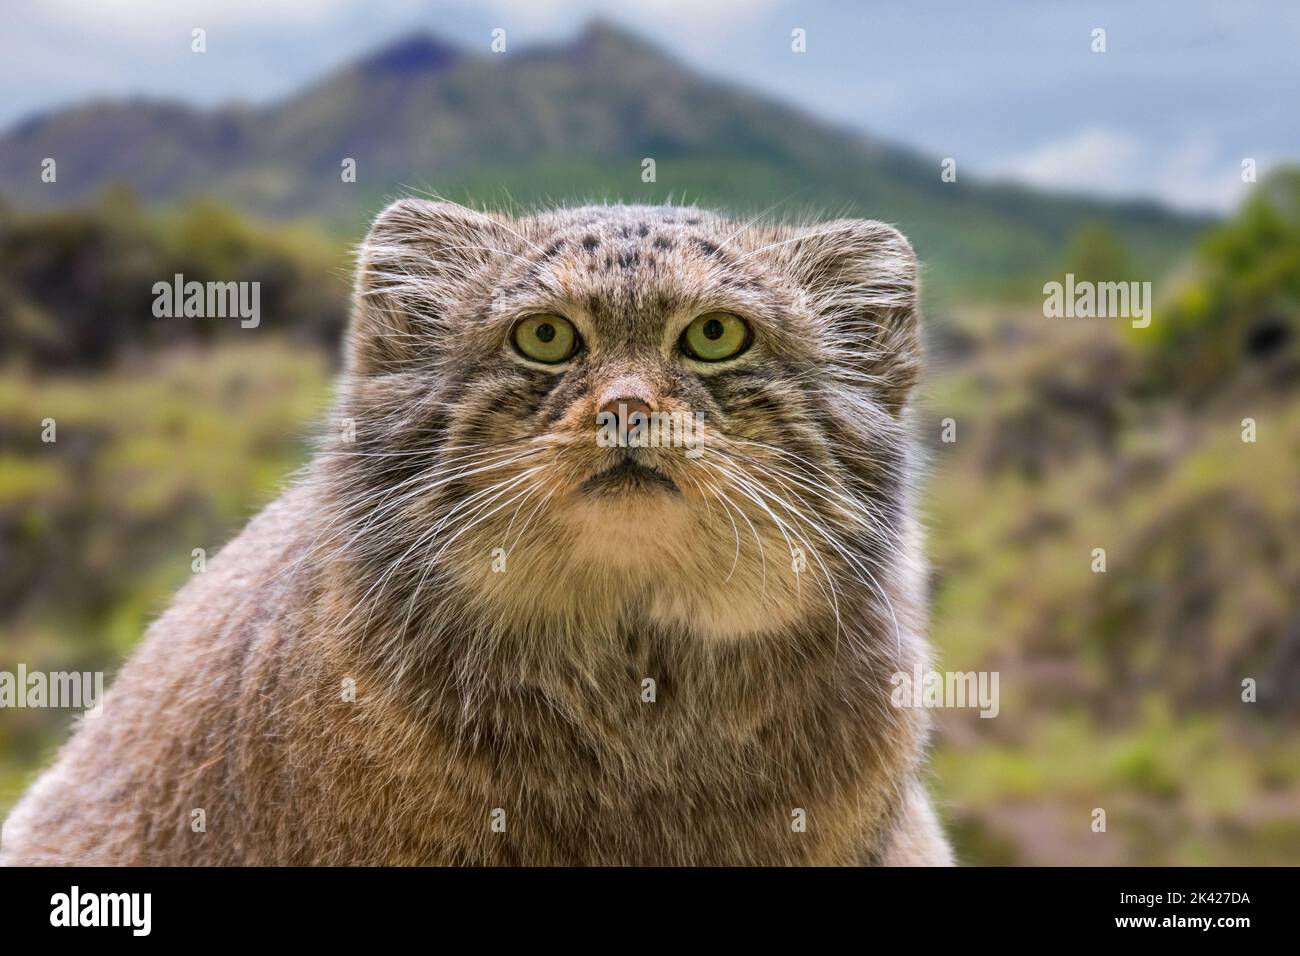 Pallas's cat / manul (Otocolobus manul) wild cat native to the Caucasus, Central Asia, Mongolia and the Tibetan Plateau. Digital composite Stock Photo